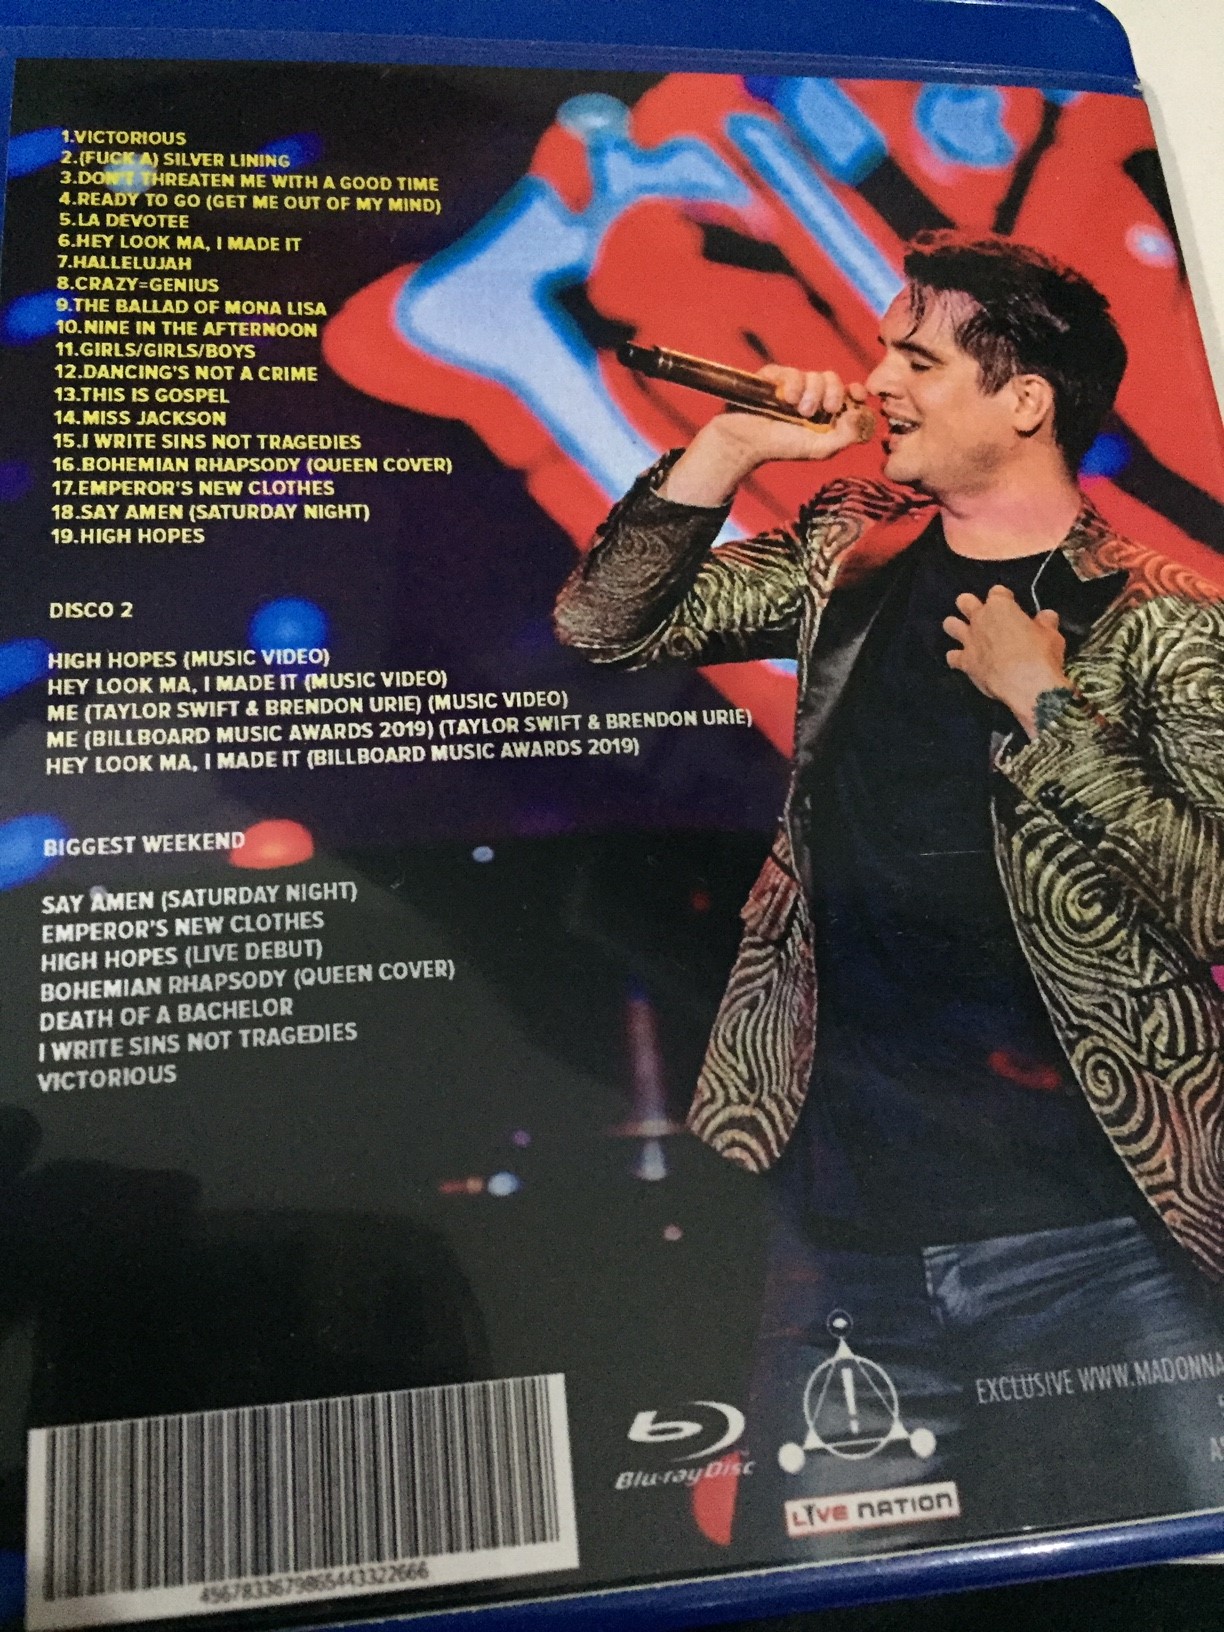 Bluray panic at the disco pray for the wiched tour rock in rio 3